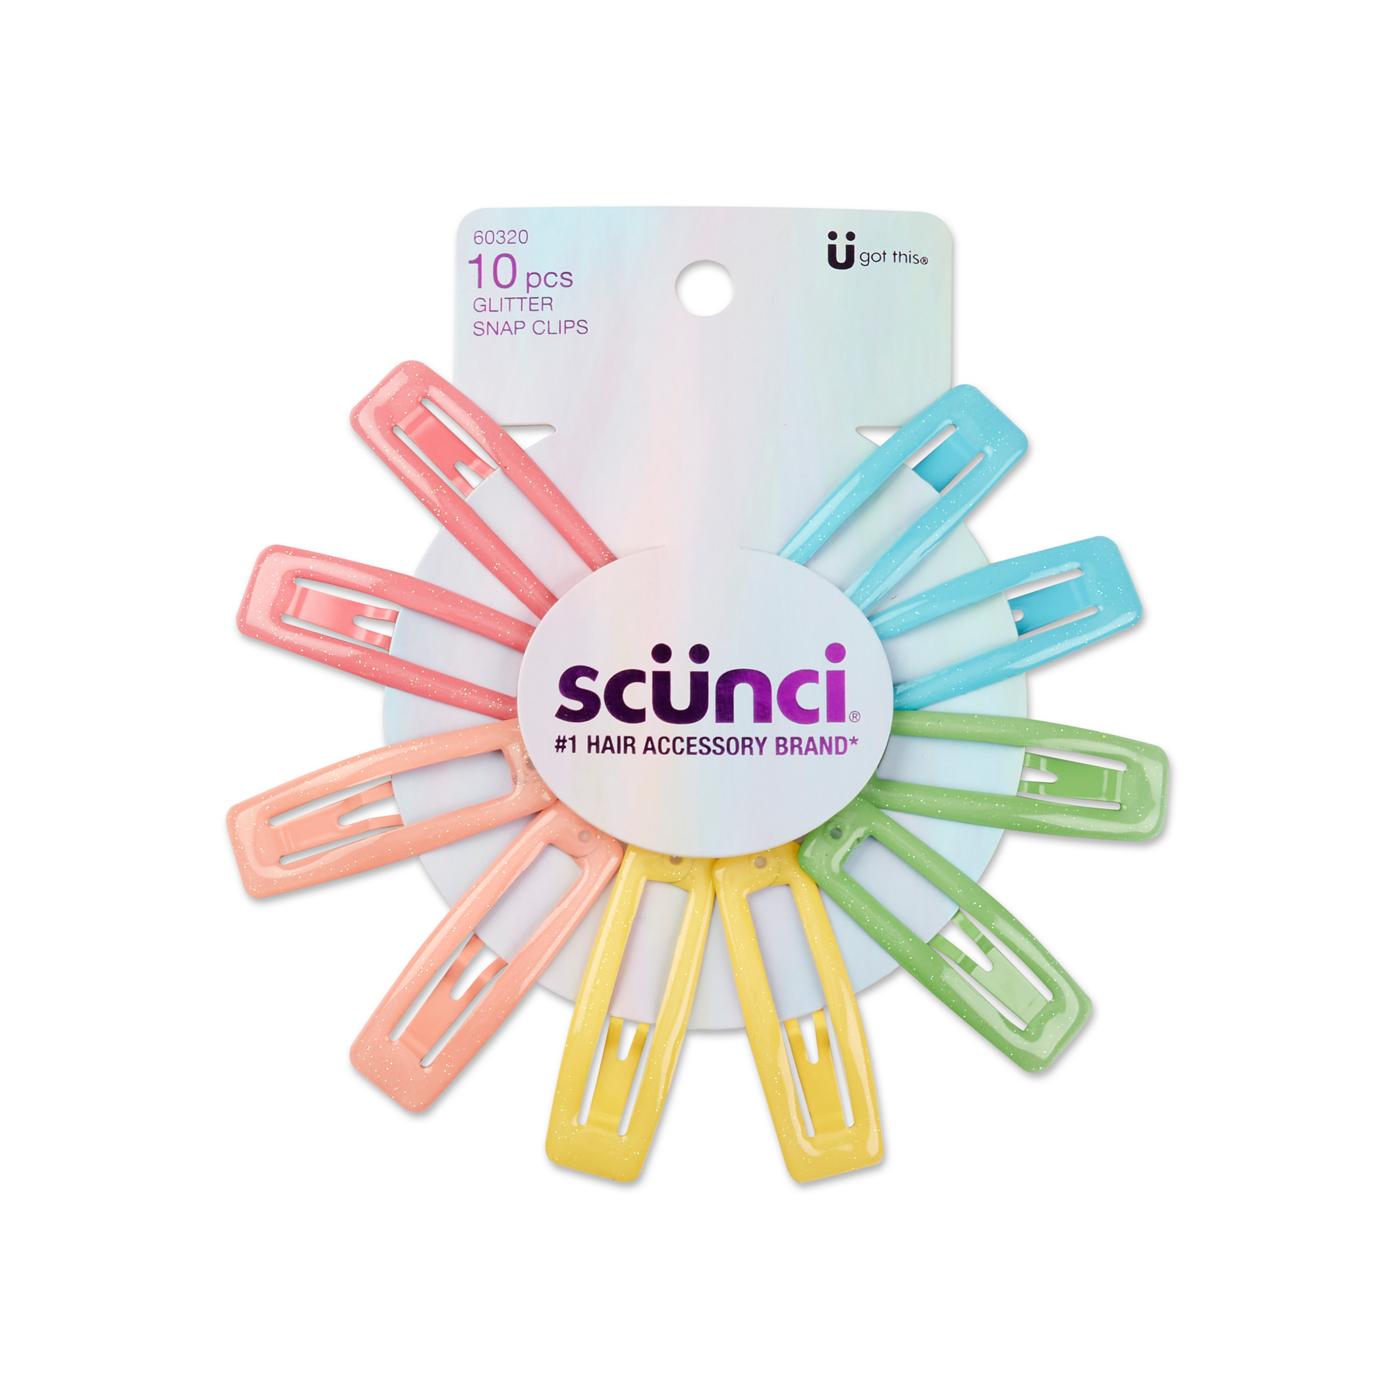 Scunci Glitter Snap Clips; image 1 of 2